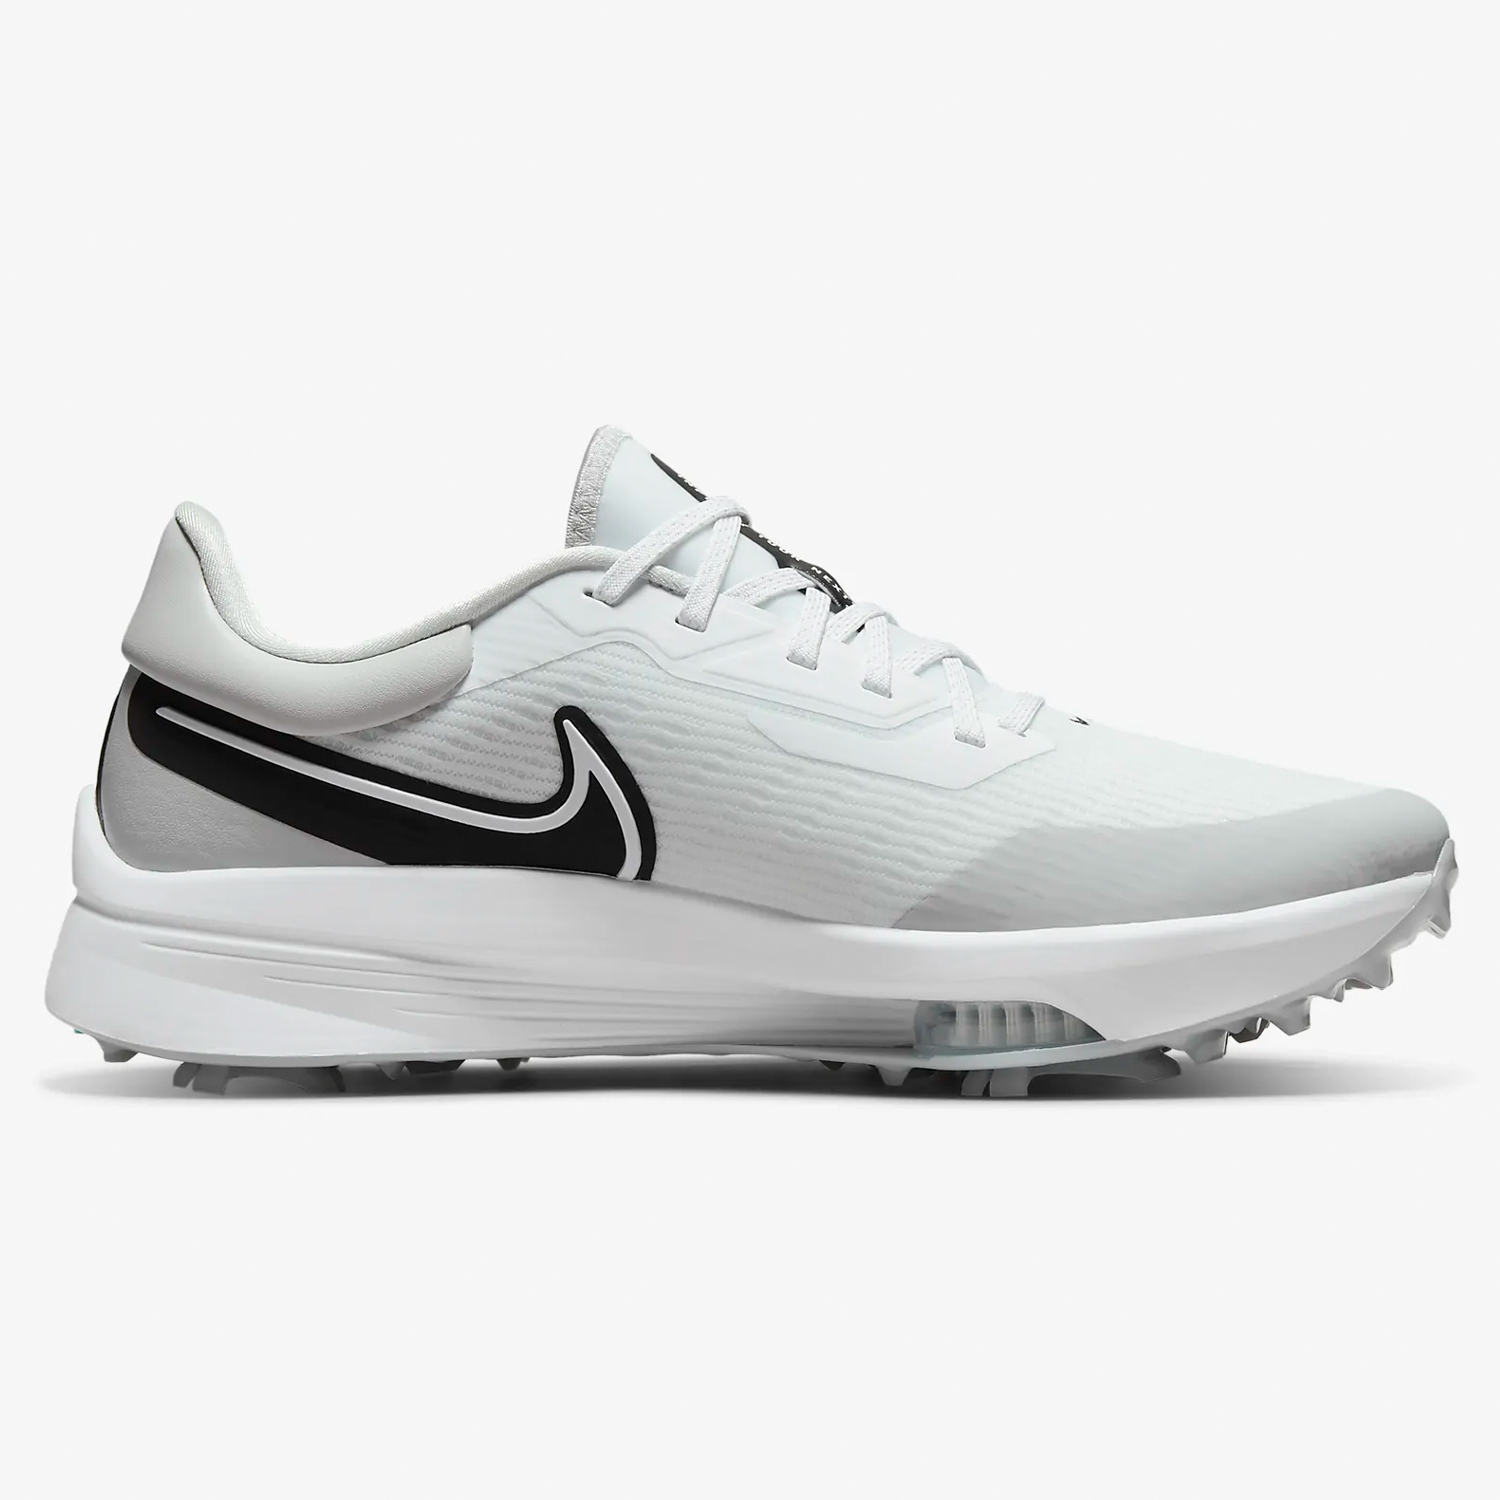 Nike Golf Air Zoom Infinity Tour Next% Golf Shoes 